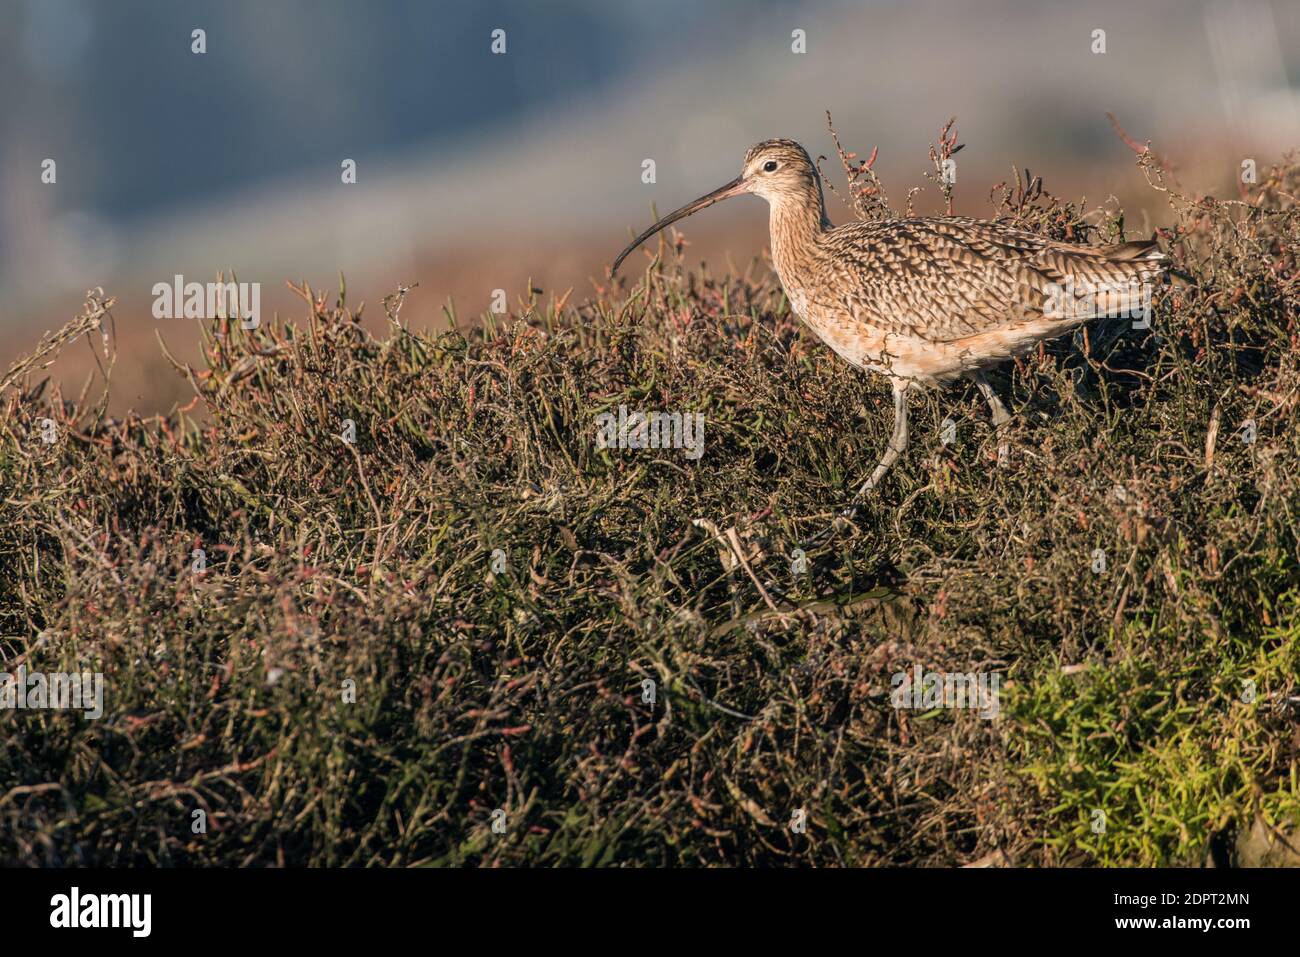 A long billed curlew (Numenius americanus), a large migratory shore bird at elkhorn slough in Monterey county, California. Stock Photo